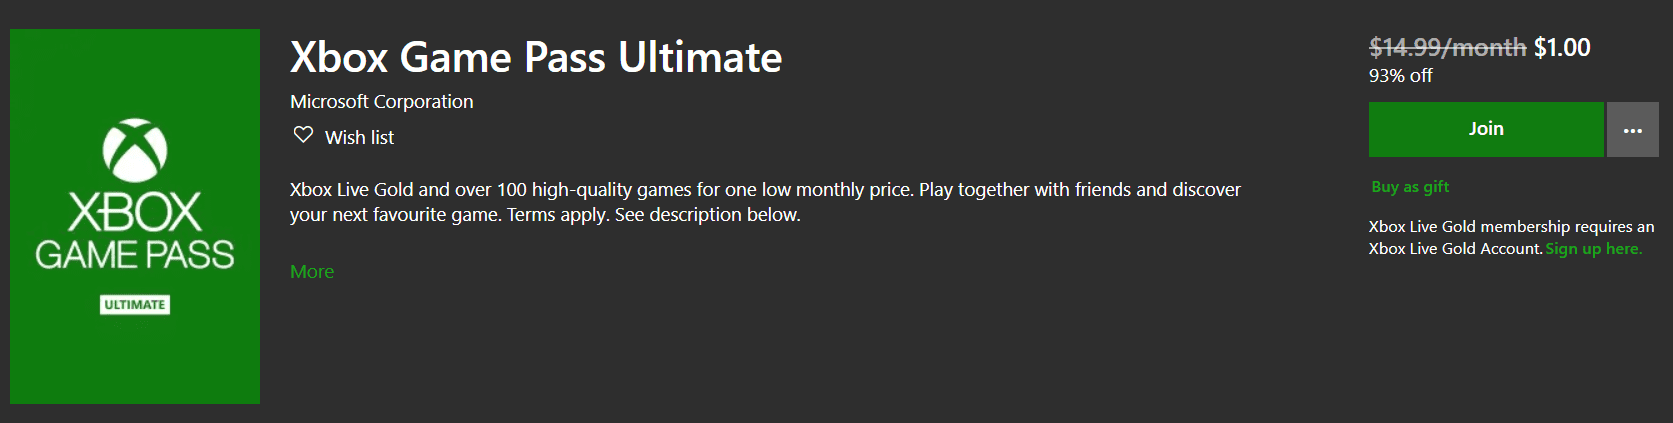 xbox ultimate $1 deal